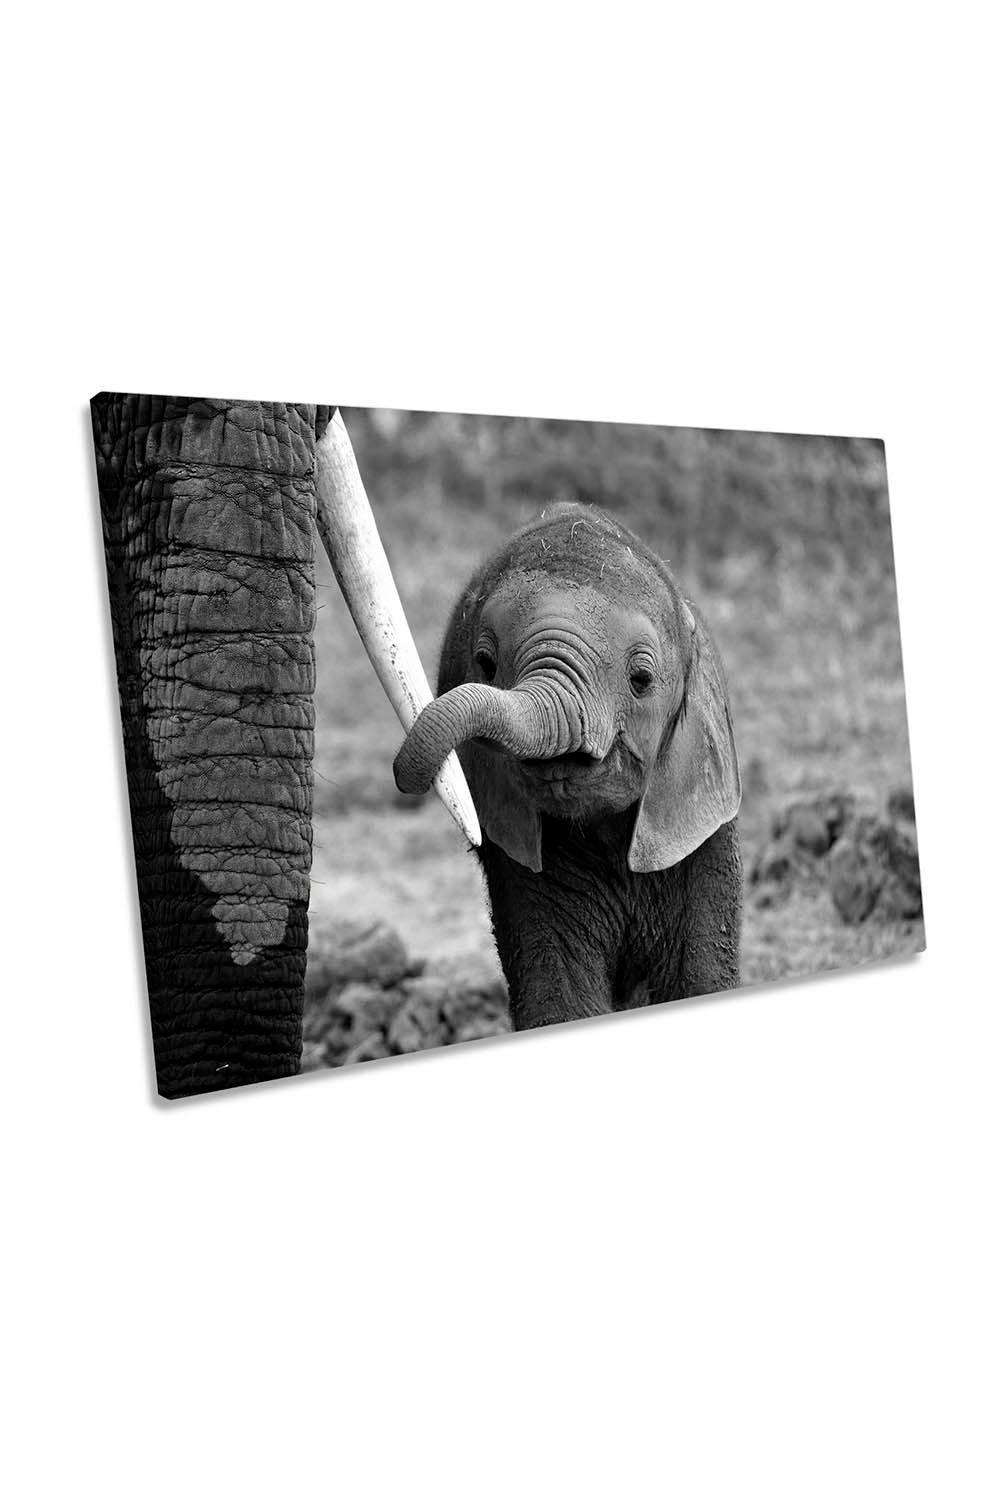 Baby Elephant Wildlife Canvas Wall Art Picture Print